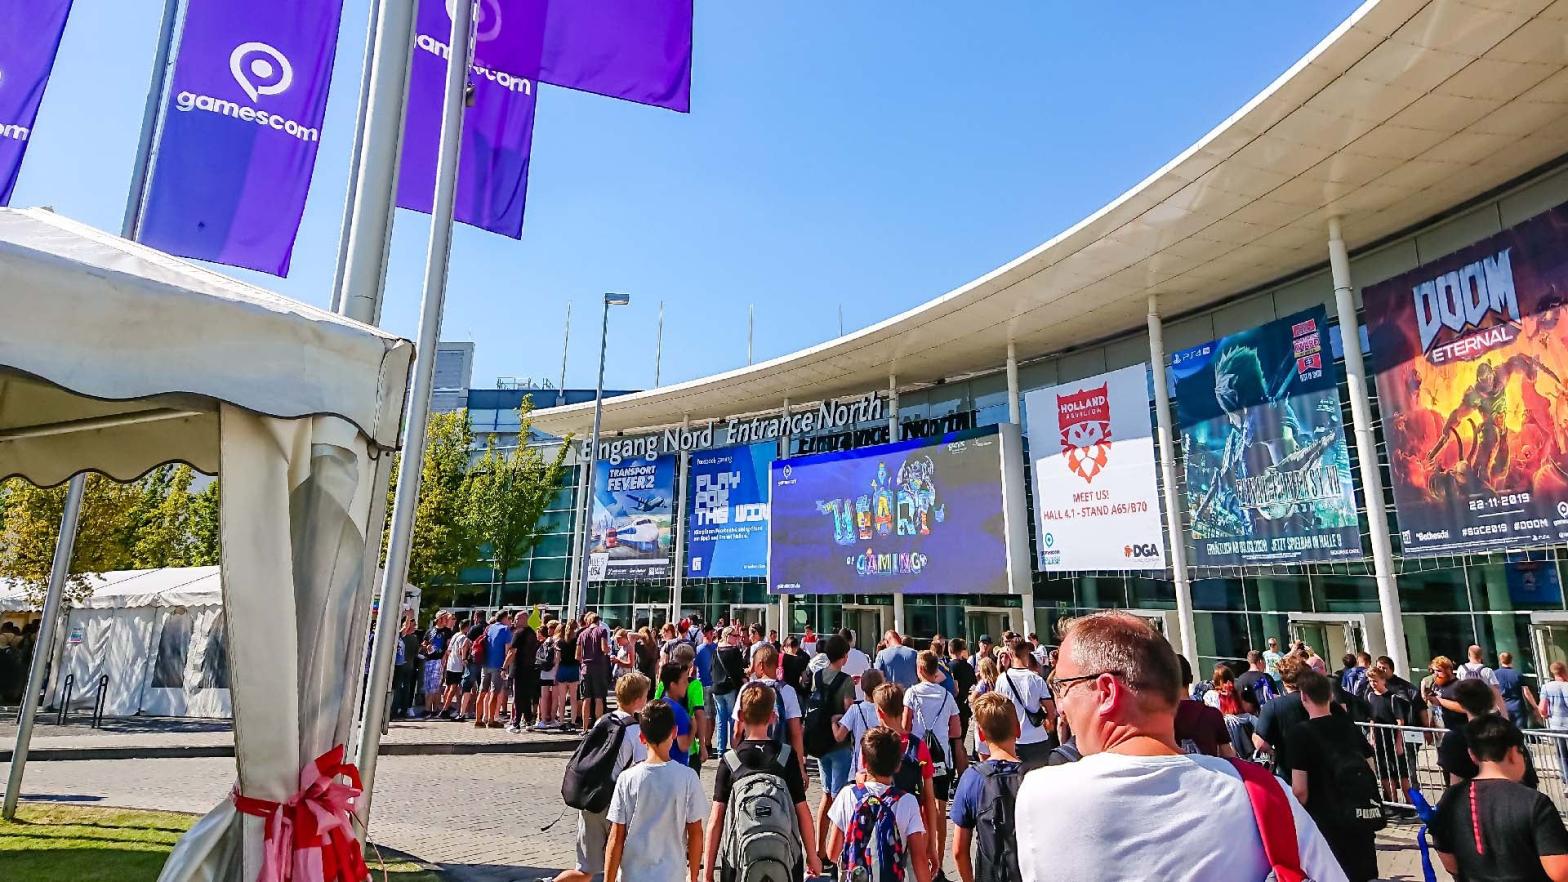 A look at the lines of GamesCom's 2019 event. (Photo: Voelz Tom, Shutterstock)